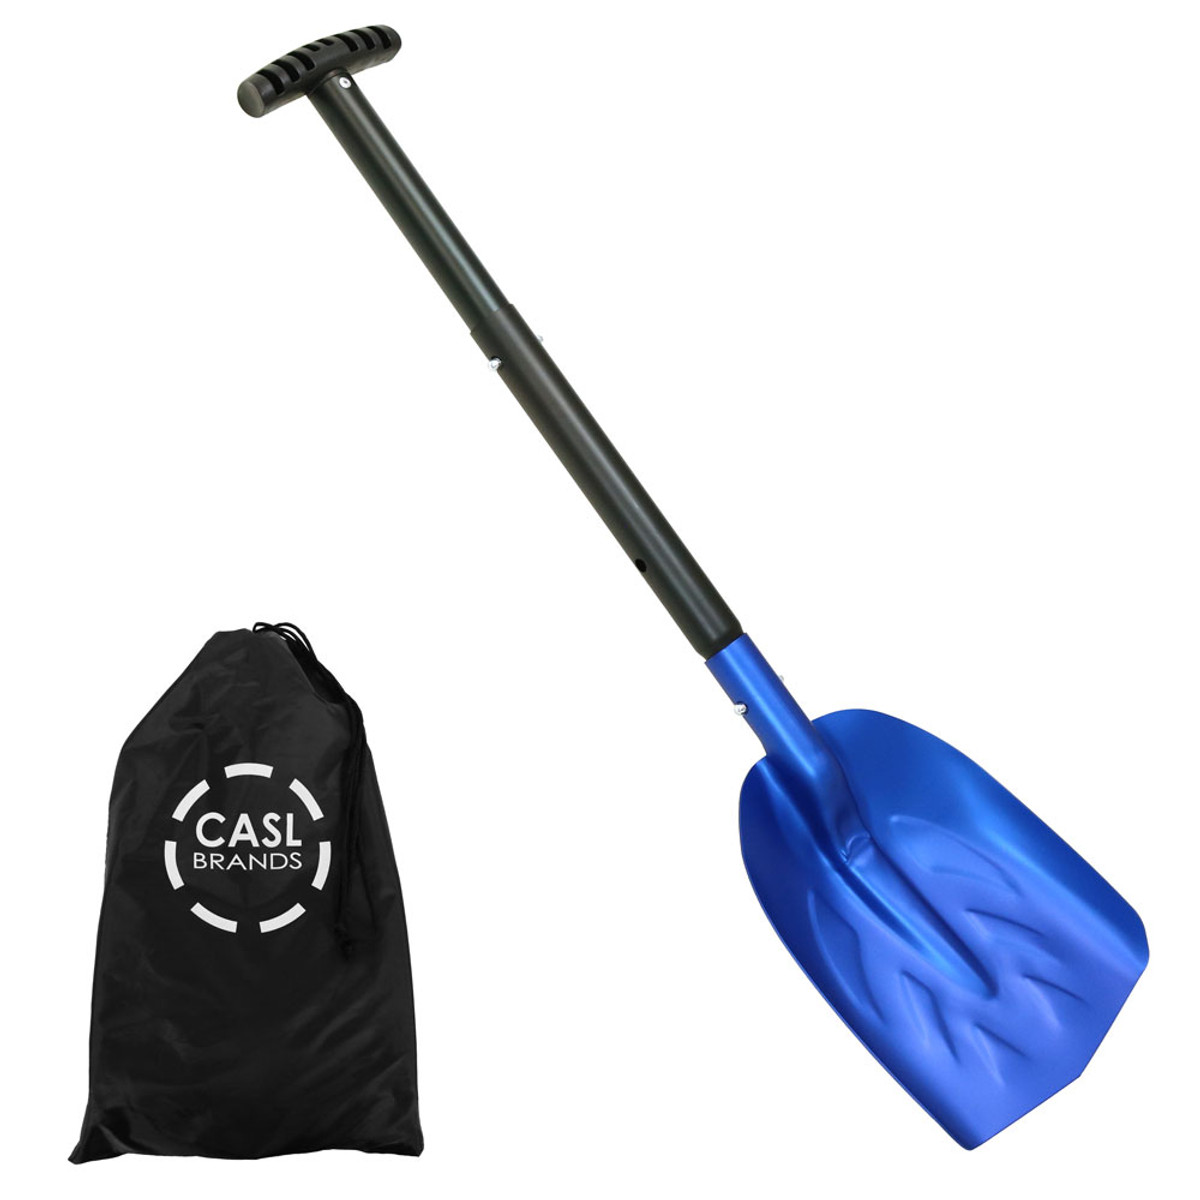 collapsible shovel for car